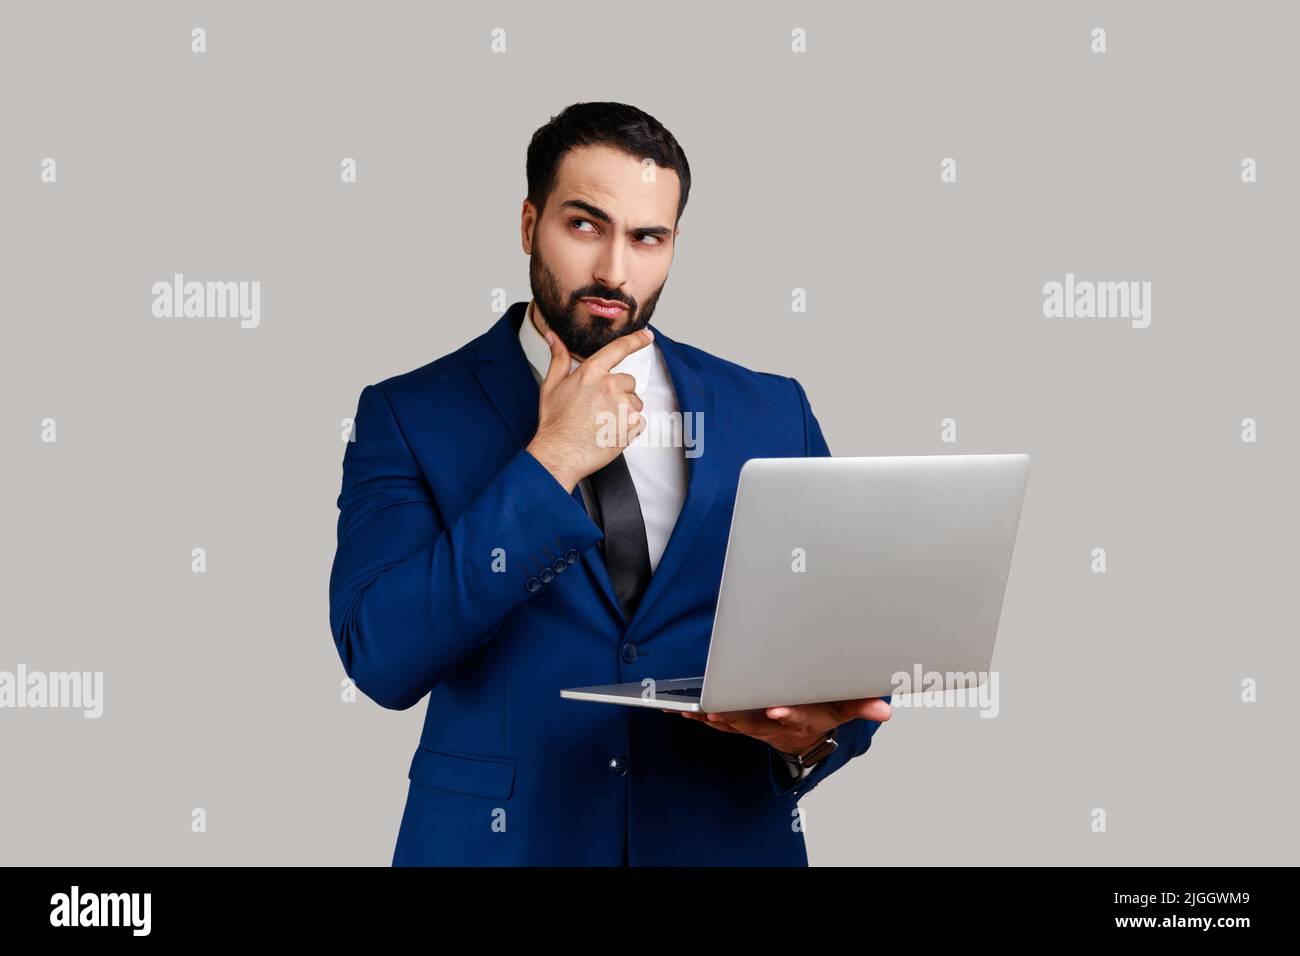 Thoughtful bearded man holding laptop and thinking over startup strategy with serious doubtful expression, wearing official style suit. Indoor studio shot isolated on gray background. Stock Photo